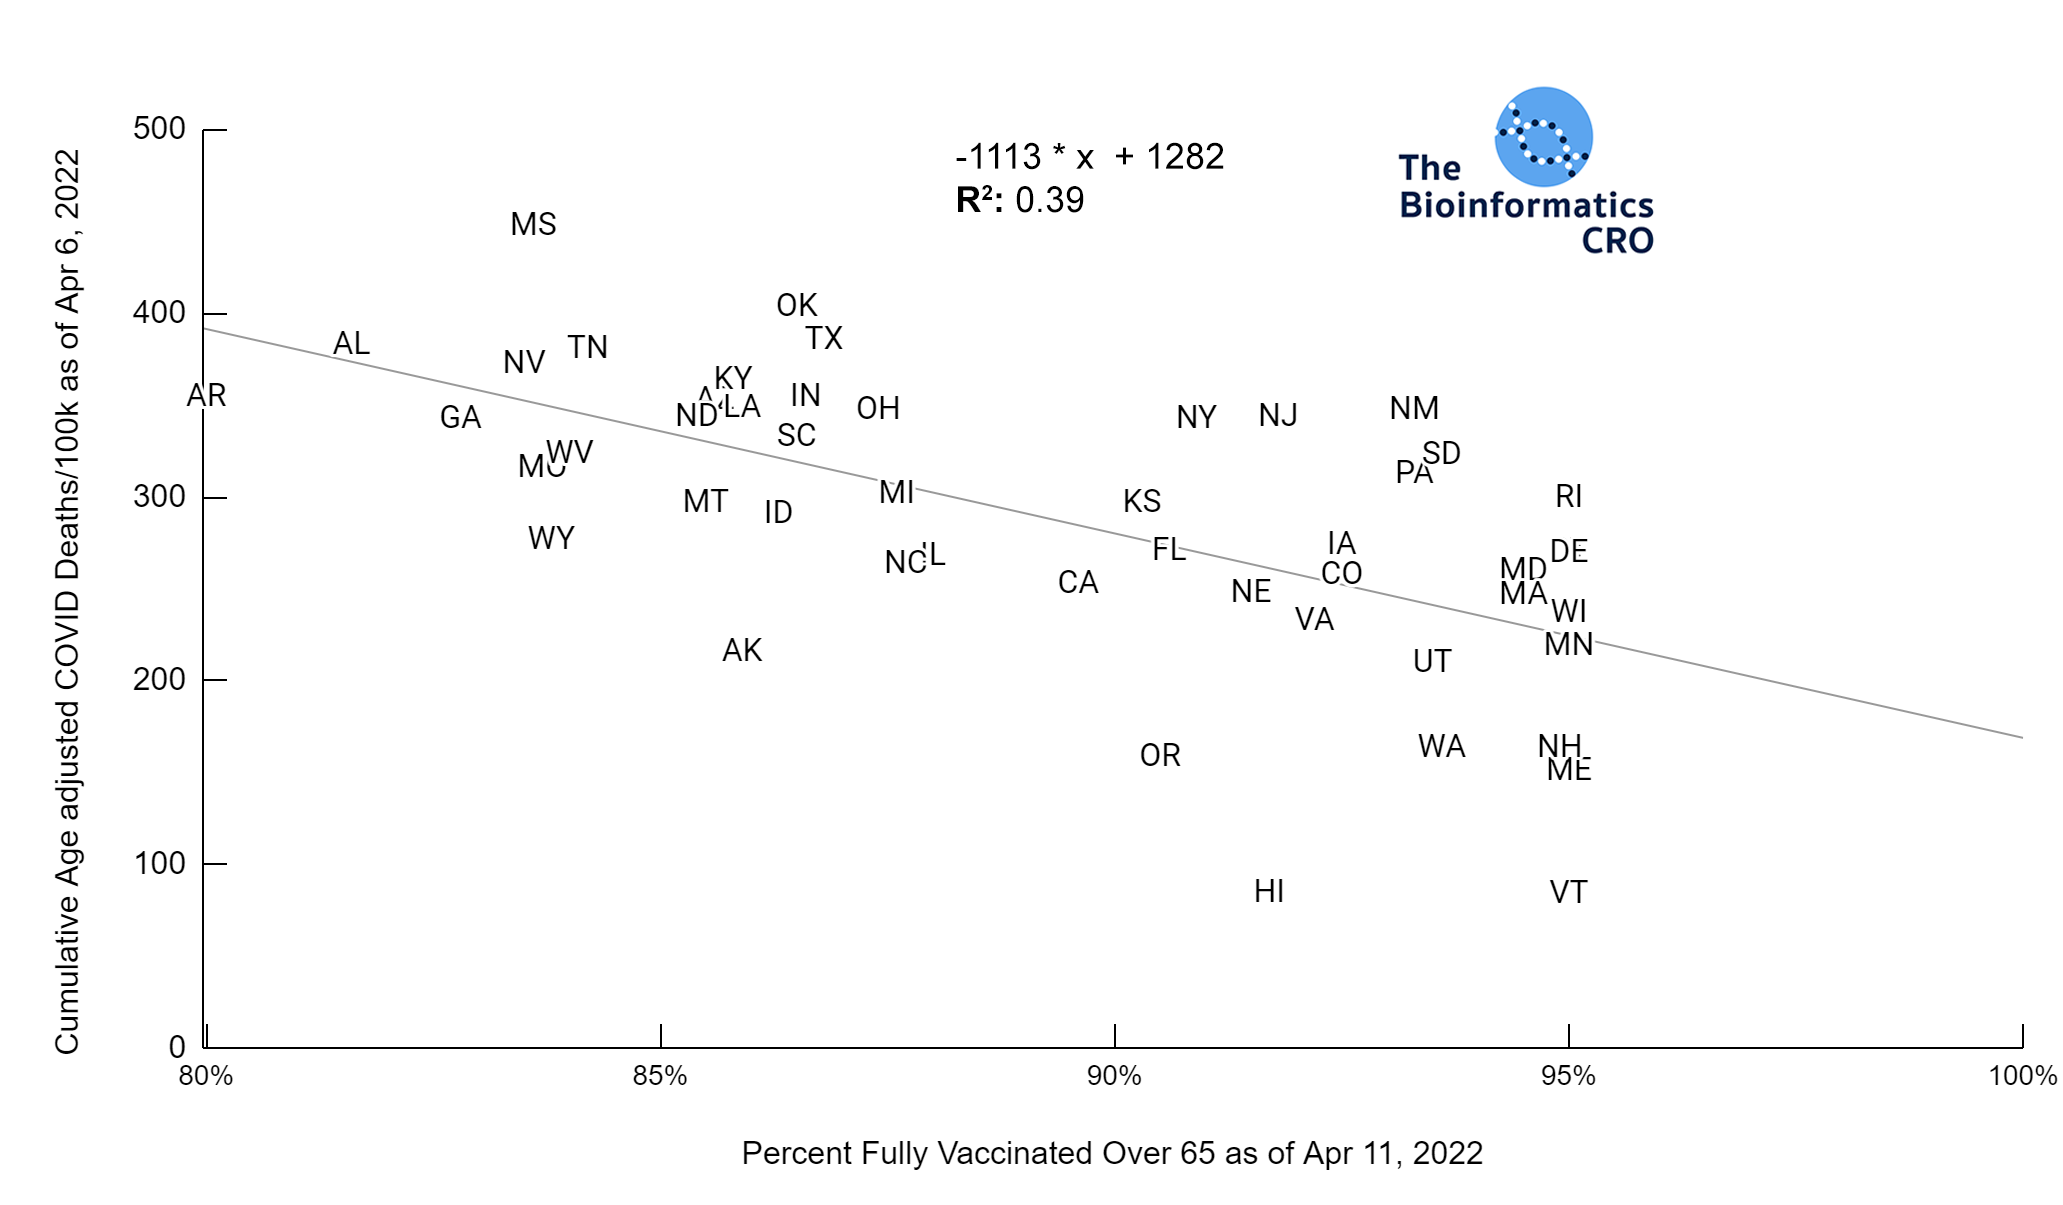 Fully vaccinated over 65 versus Age-adjusted deaths | y = -1113 * x + 1282 | R^2 = 0.39